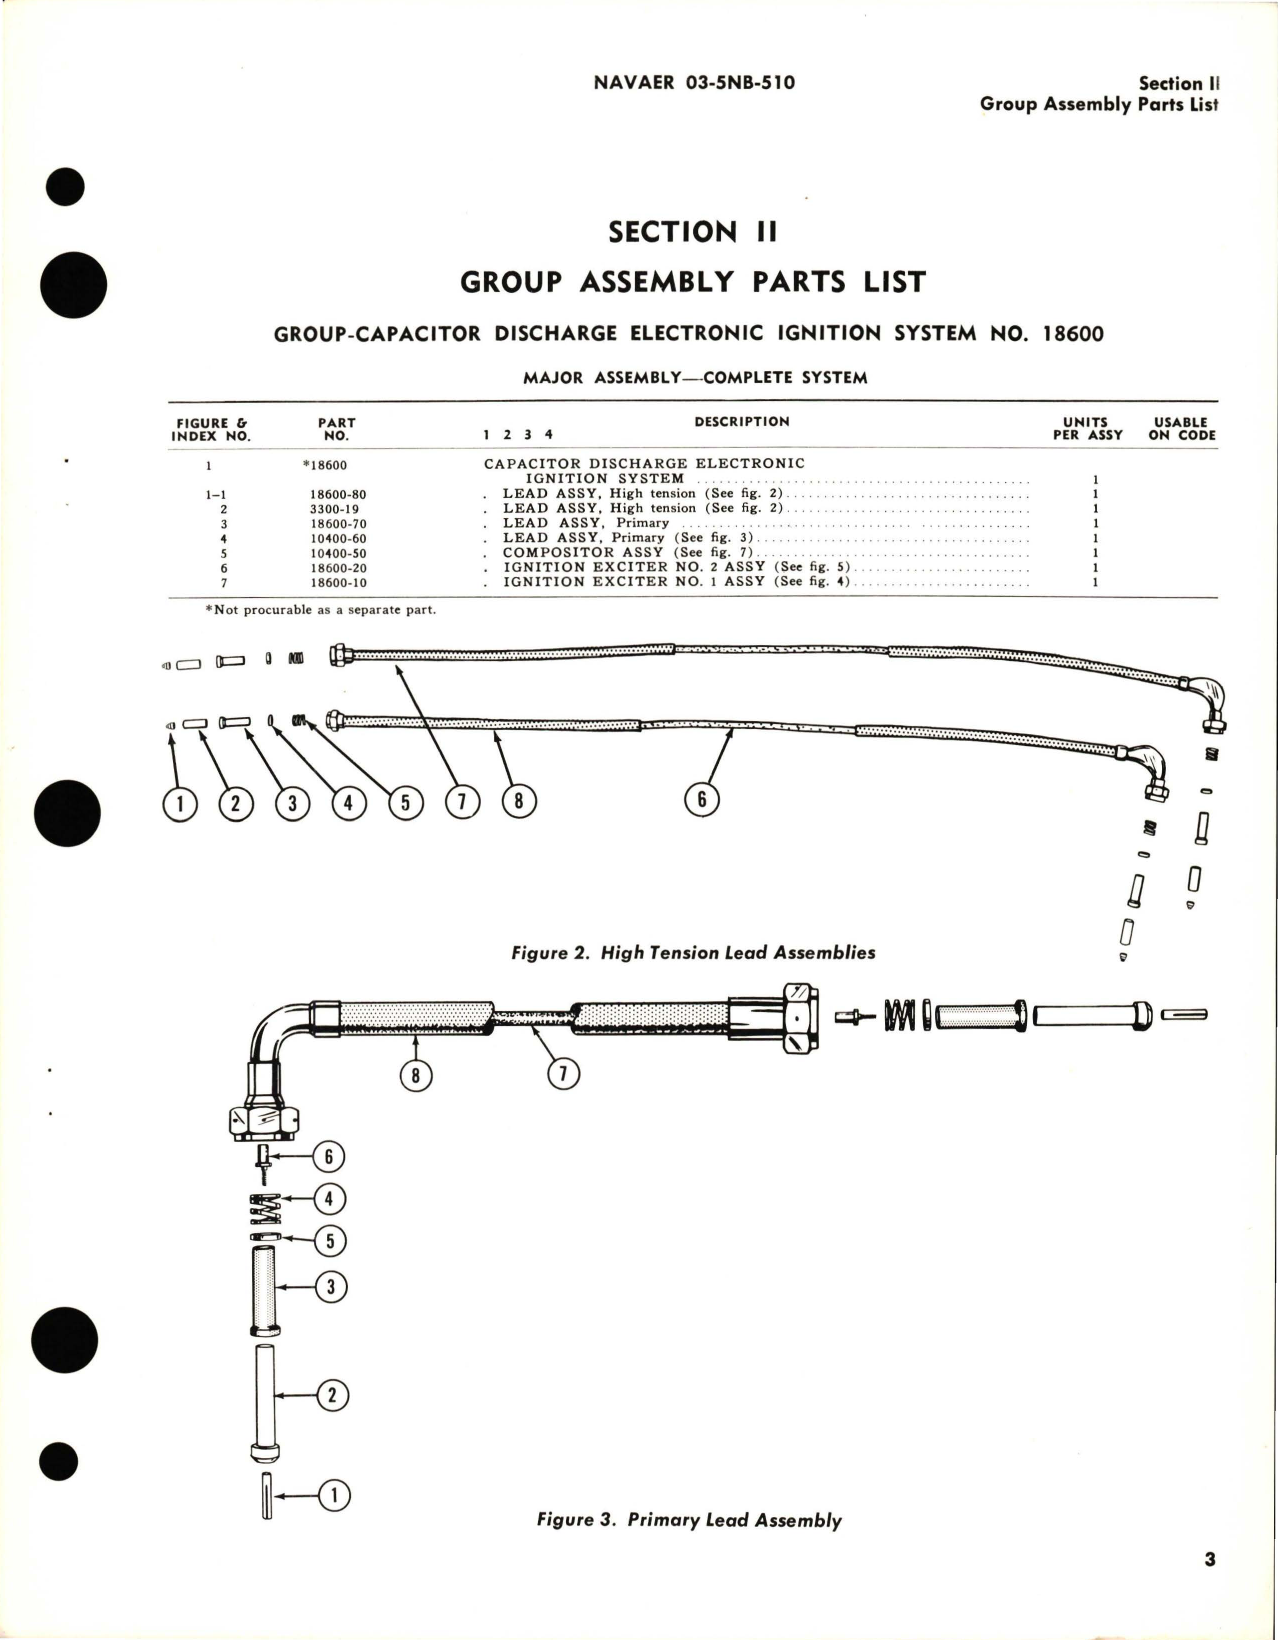 Sample page 5 from AirCorps Library document: Illustrated Parts Breakdown for Capacitor Discharge Electronic Ignition System - No 18600